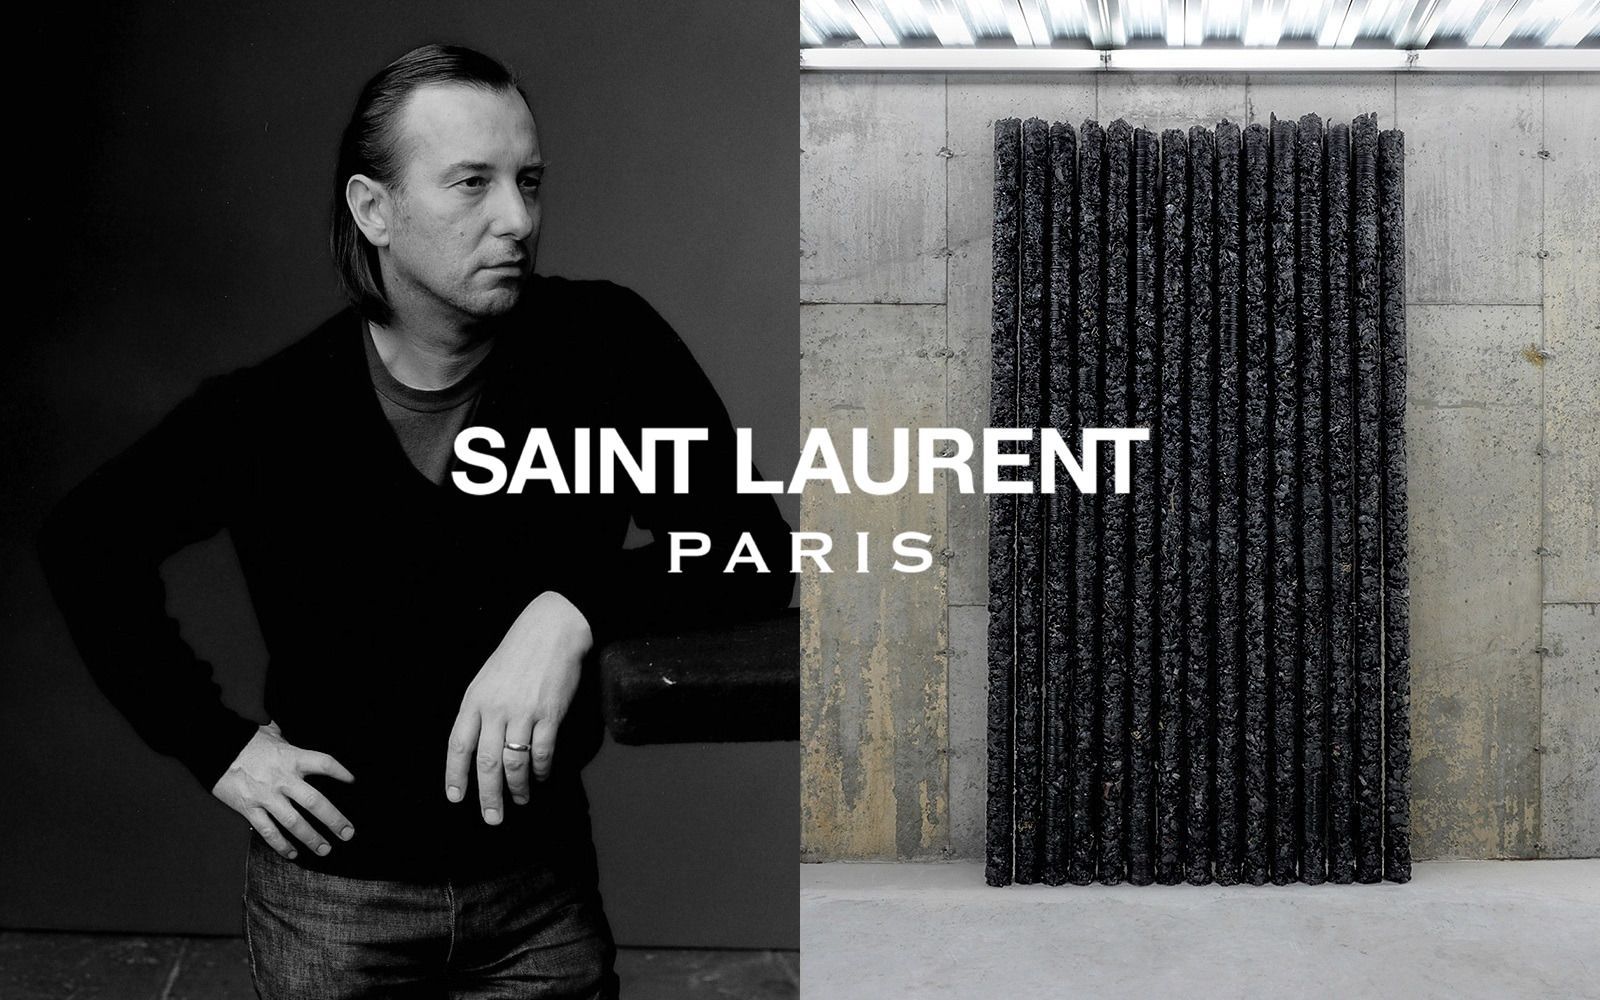 An interview with the artist Helmut Lang